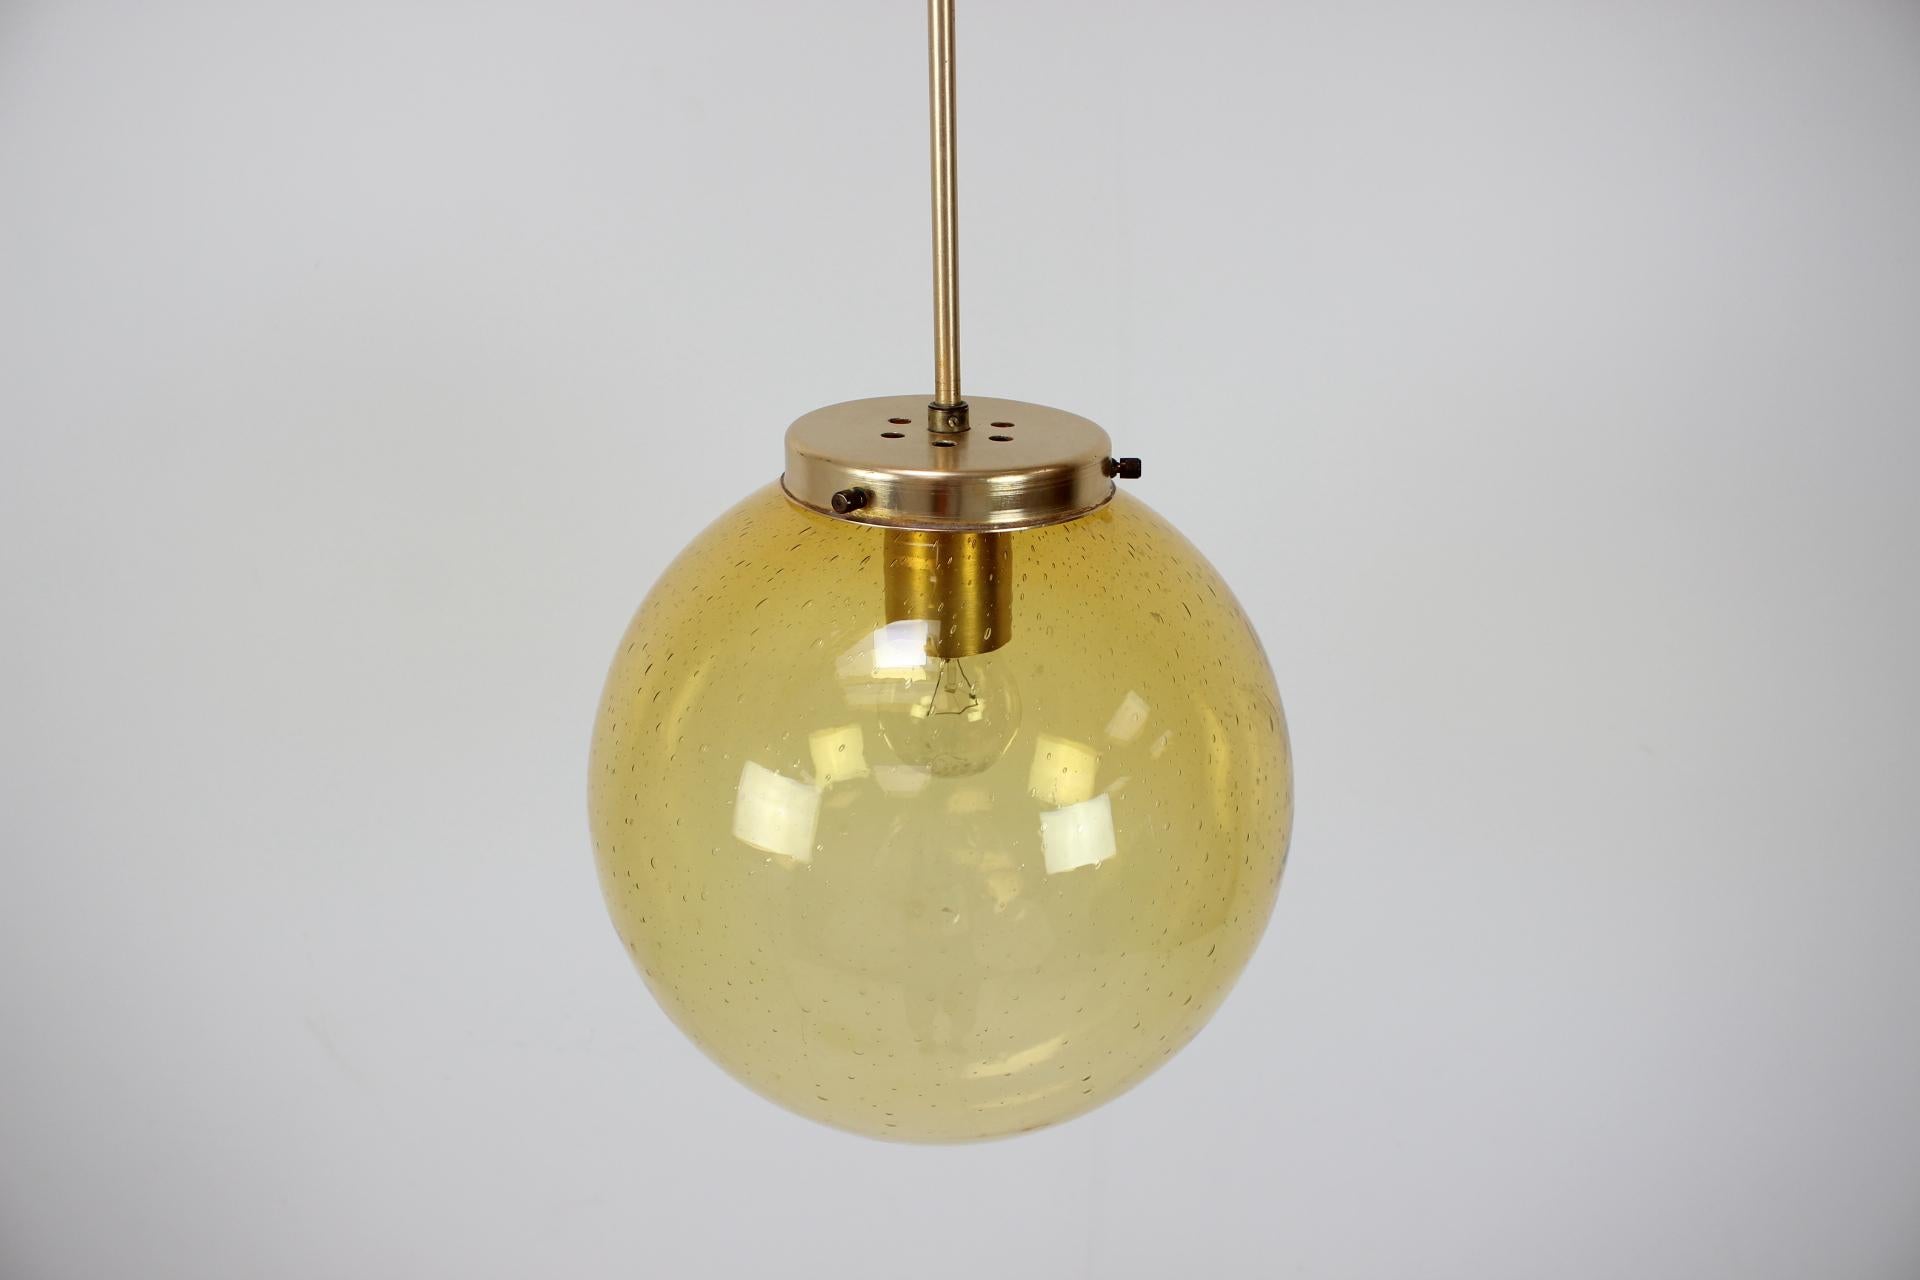 - Made in Czechoslovakia.
- Made of metal, glass.
- Re-polished.
- Fully functional.
- Good, original condition.
- 1x 60W,E27 or E26 bulb
- With aged patina.
- US wiring compatible.
 